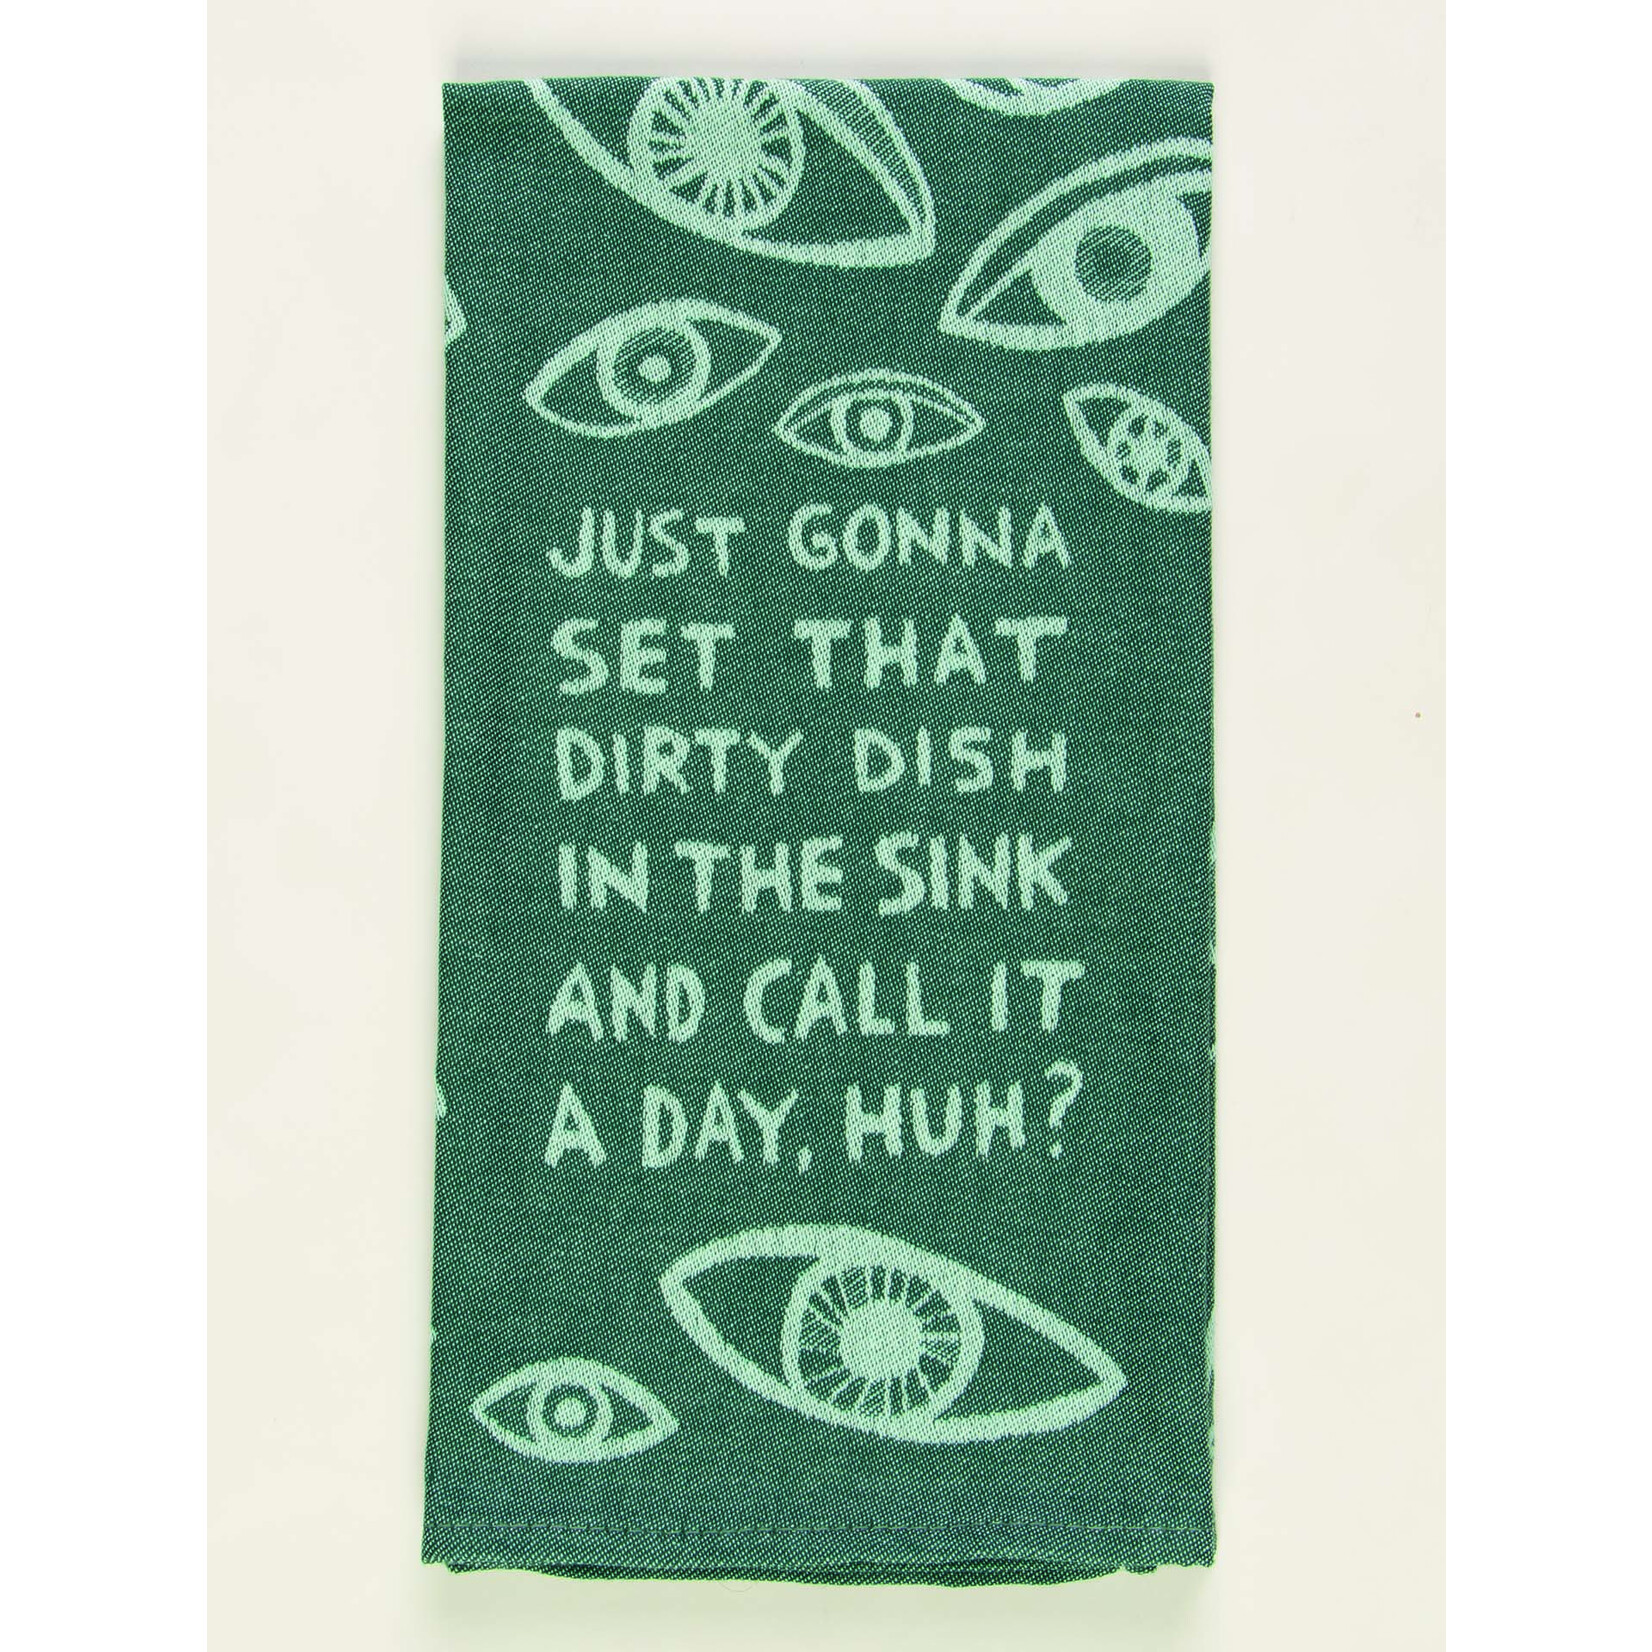 Blue Q Just Gonna Set That Dirty Dish In The Sink And Call It A Day, Huh? Dish Towel